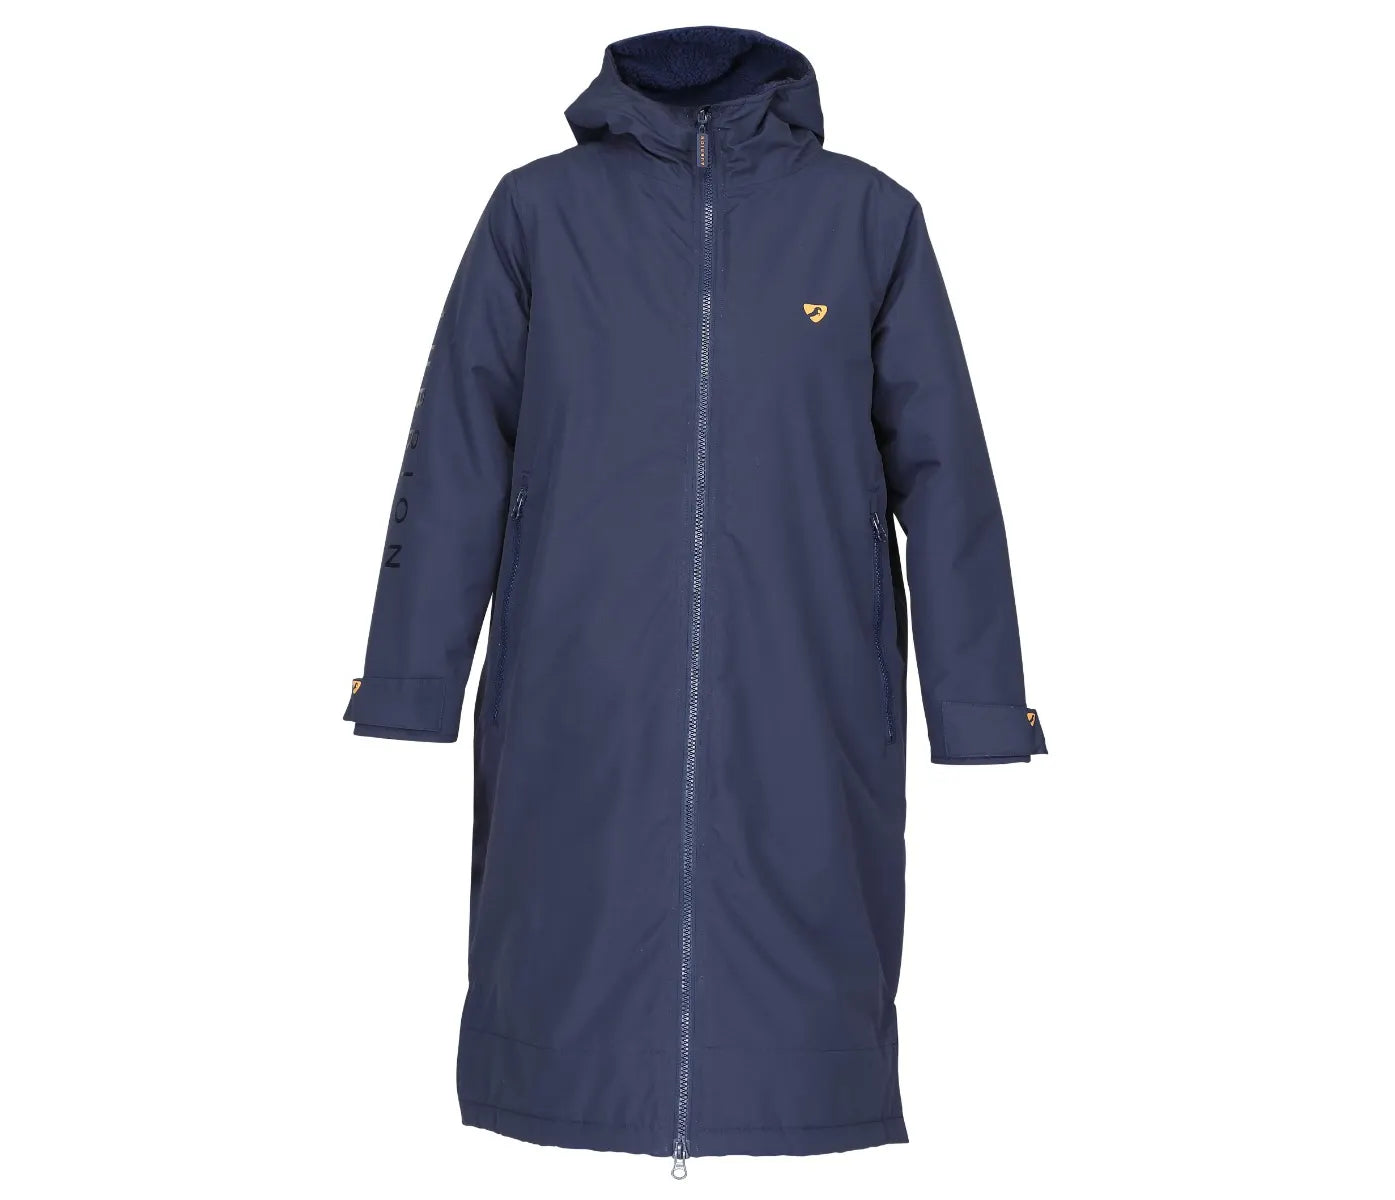 Shires Aubrion Core All Weather Robe - Unisex Navy